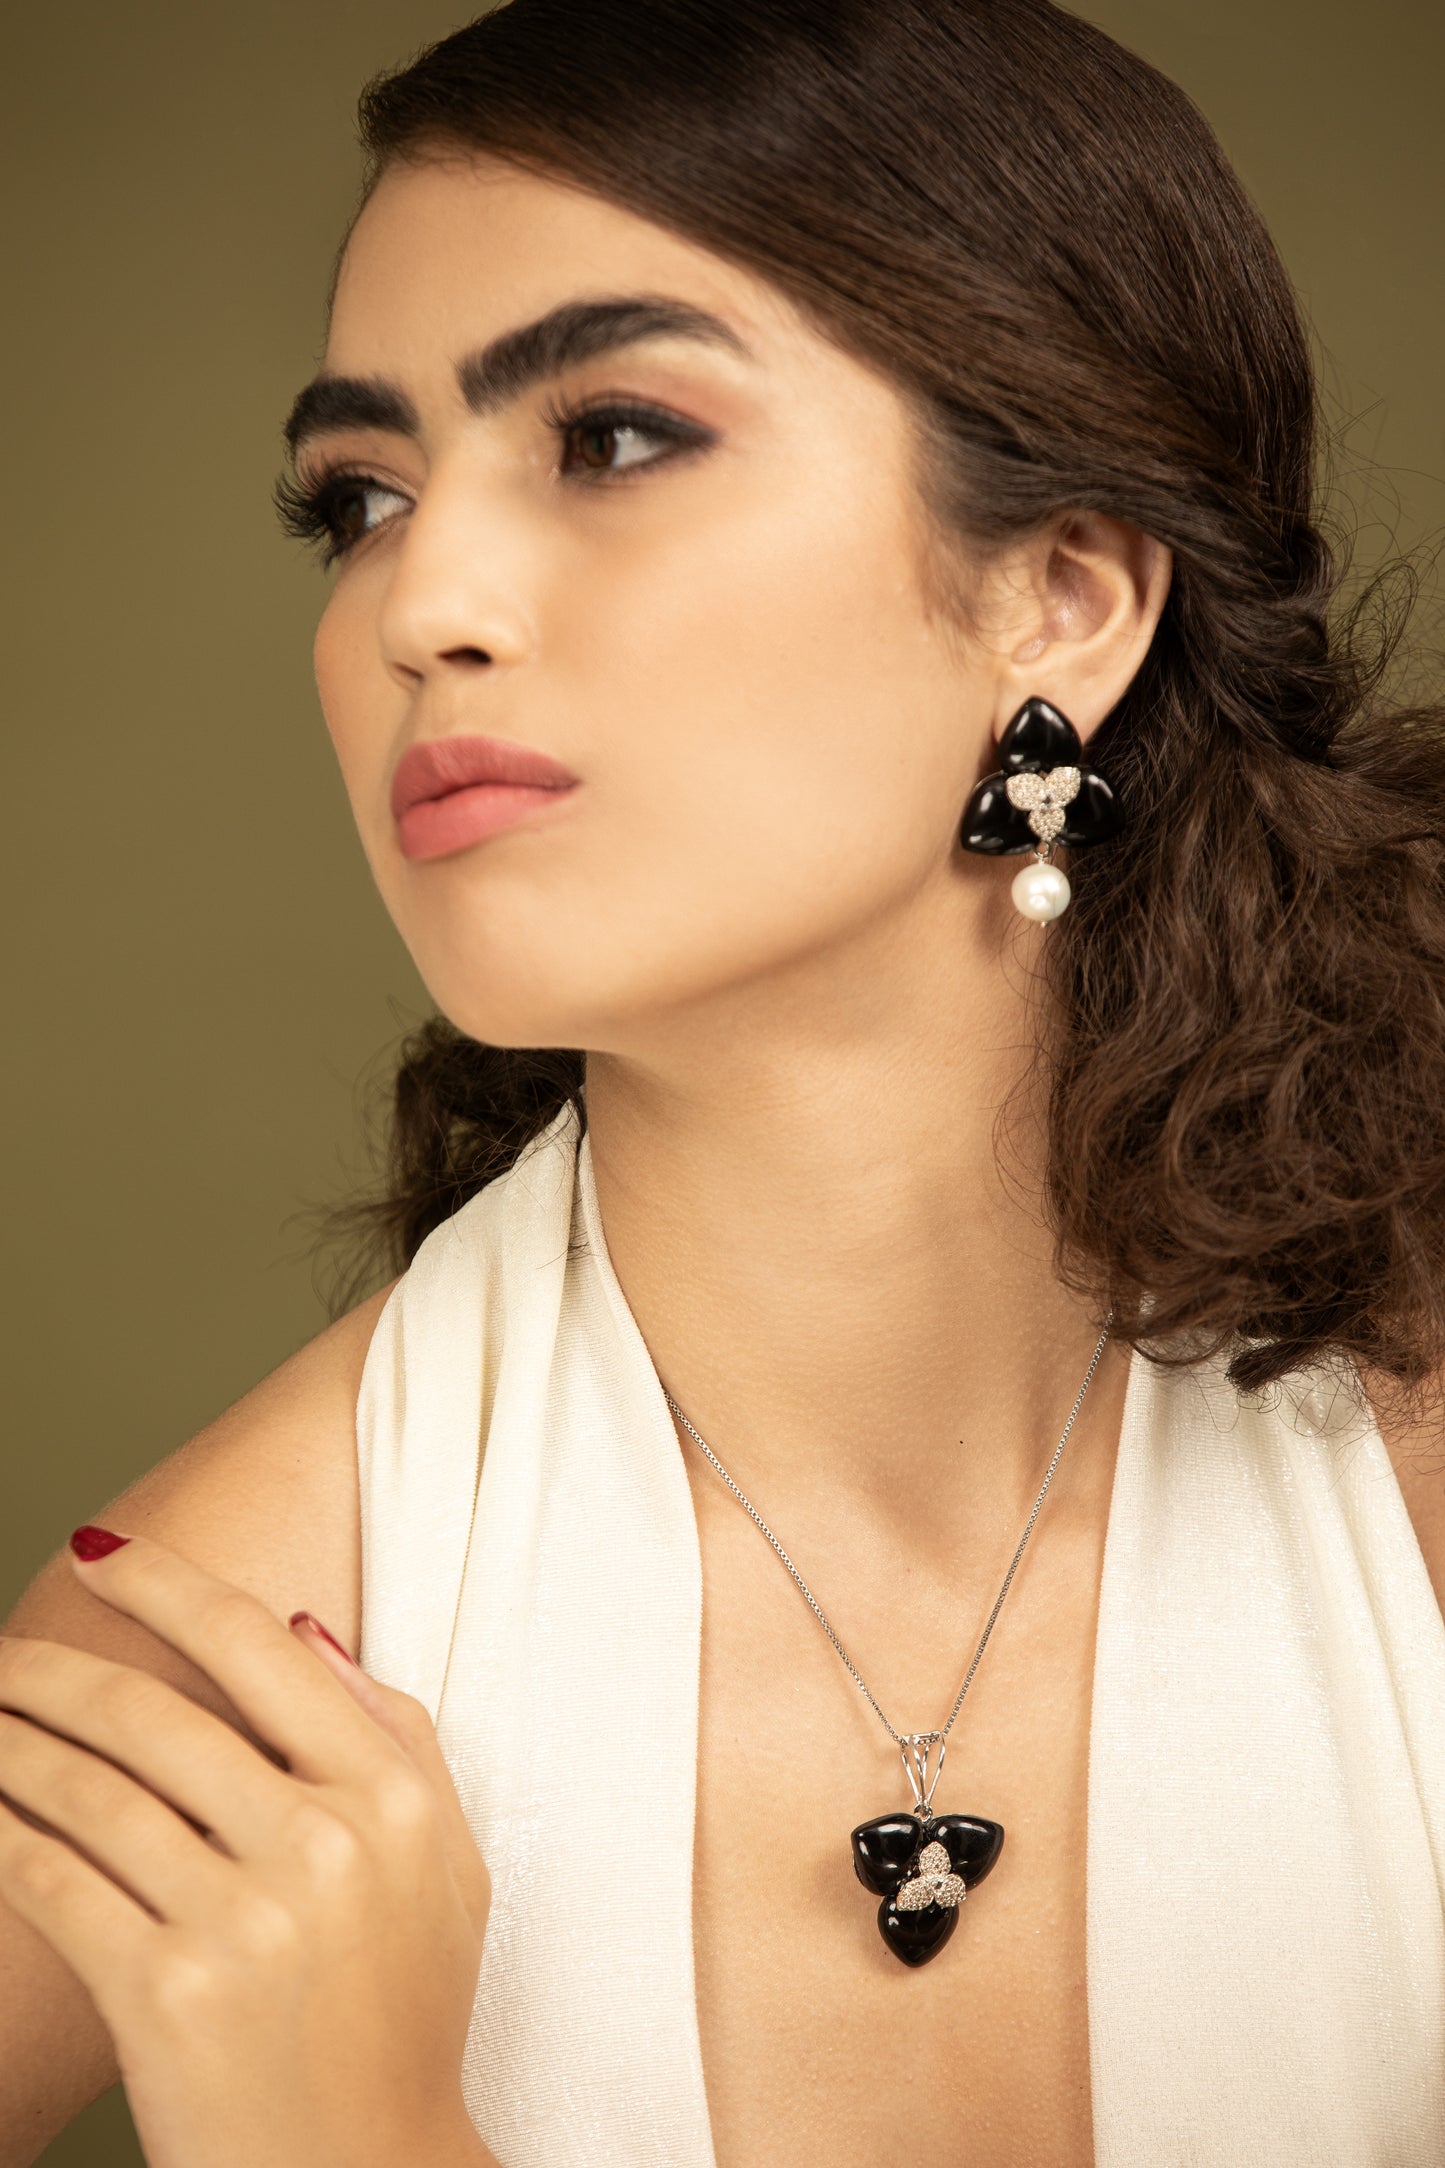 Classy Earrings & Pendant Ensemble with Swarovski Bud Detail: Crafted with precision, embodying timeless elegance and sophistication.